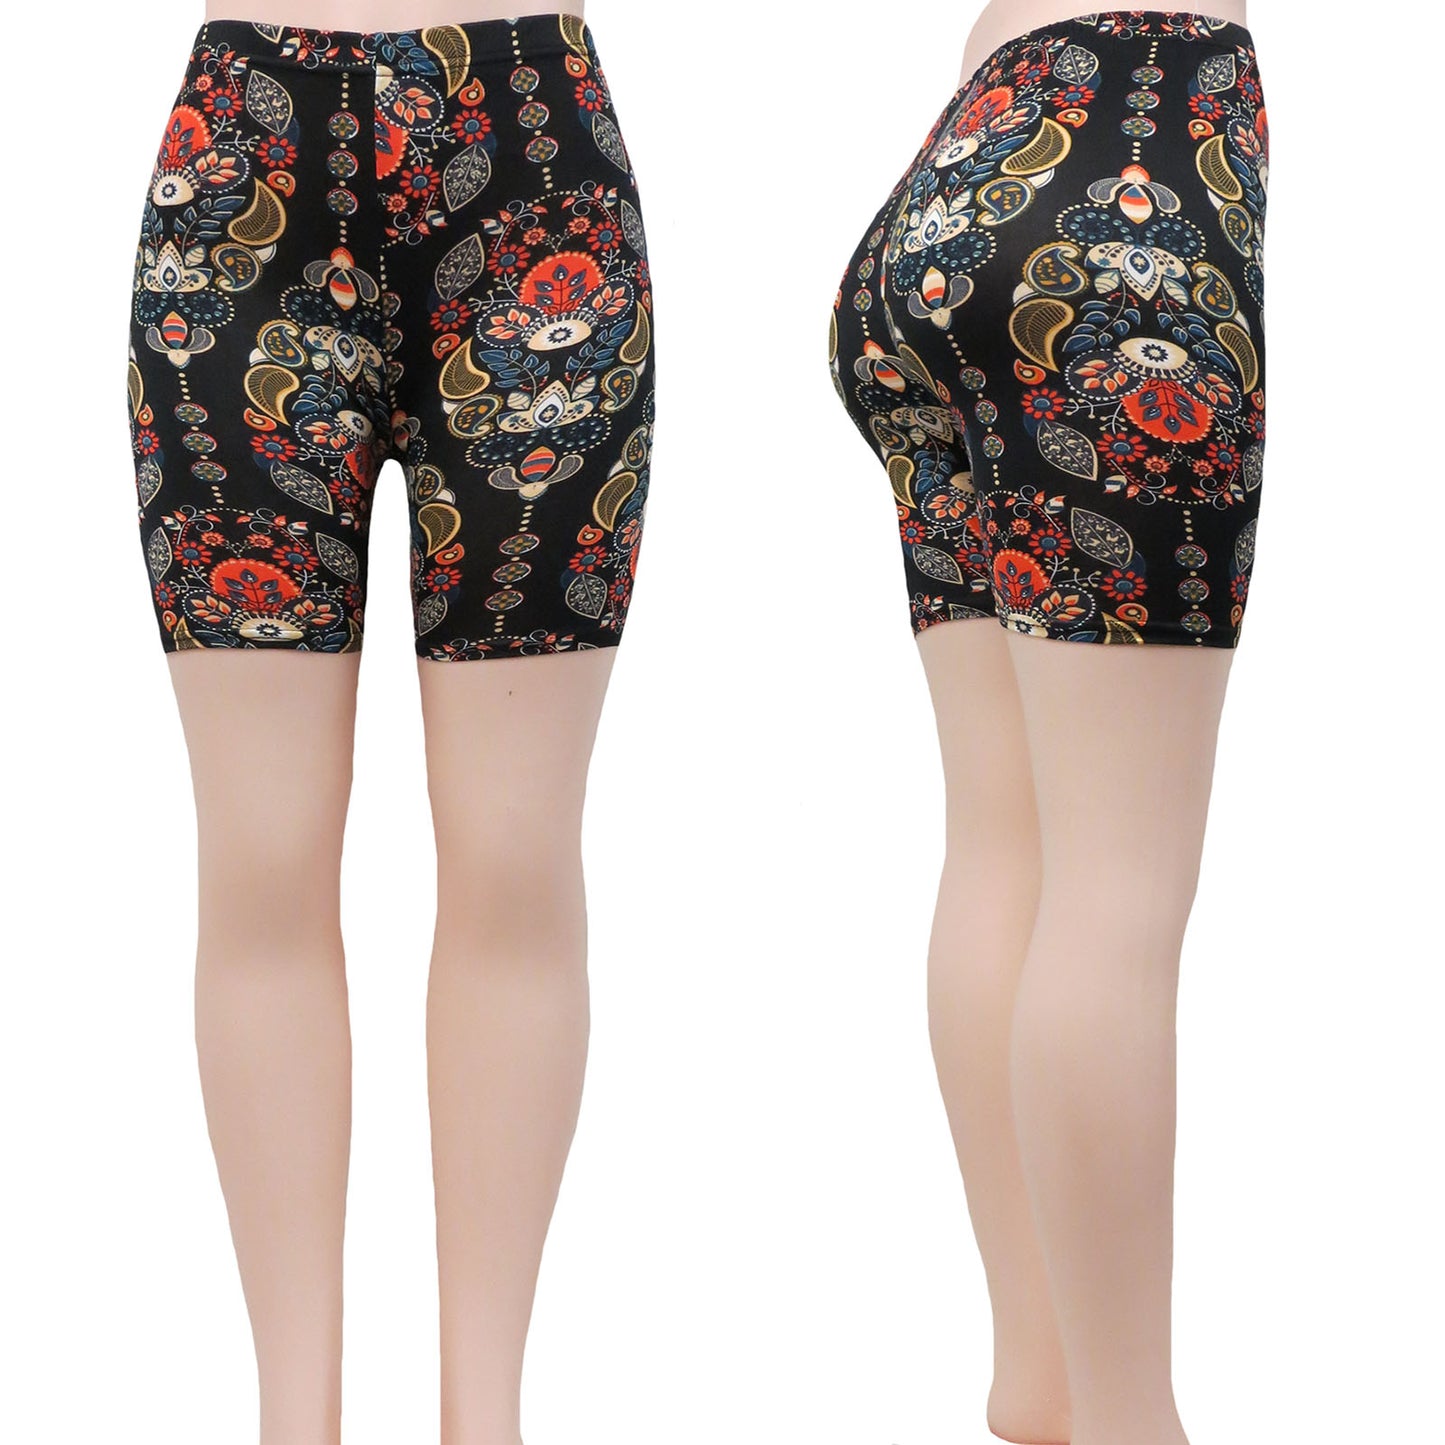 Wholesale Bike Shorts for Women in Assorted Floral Prints - Alessa Rochelle